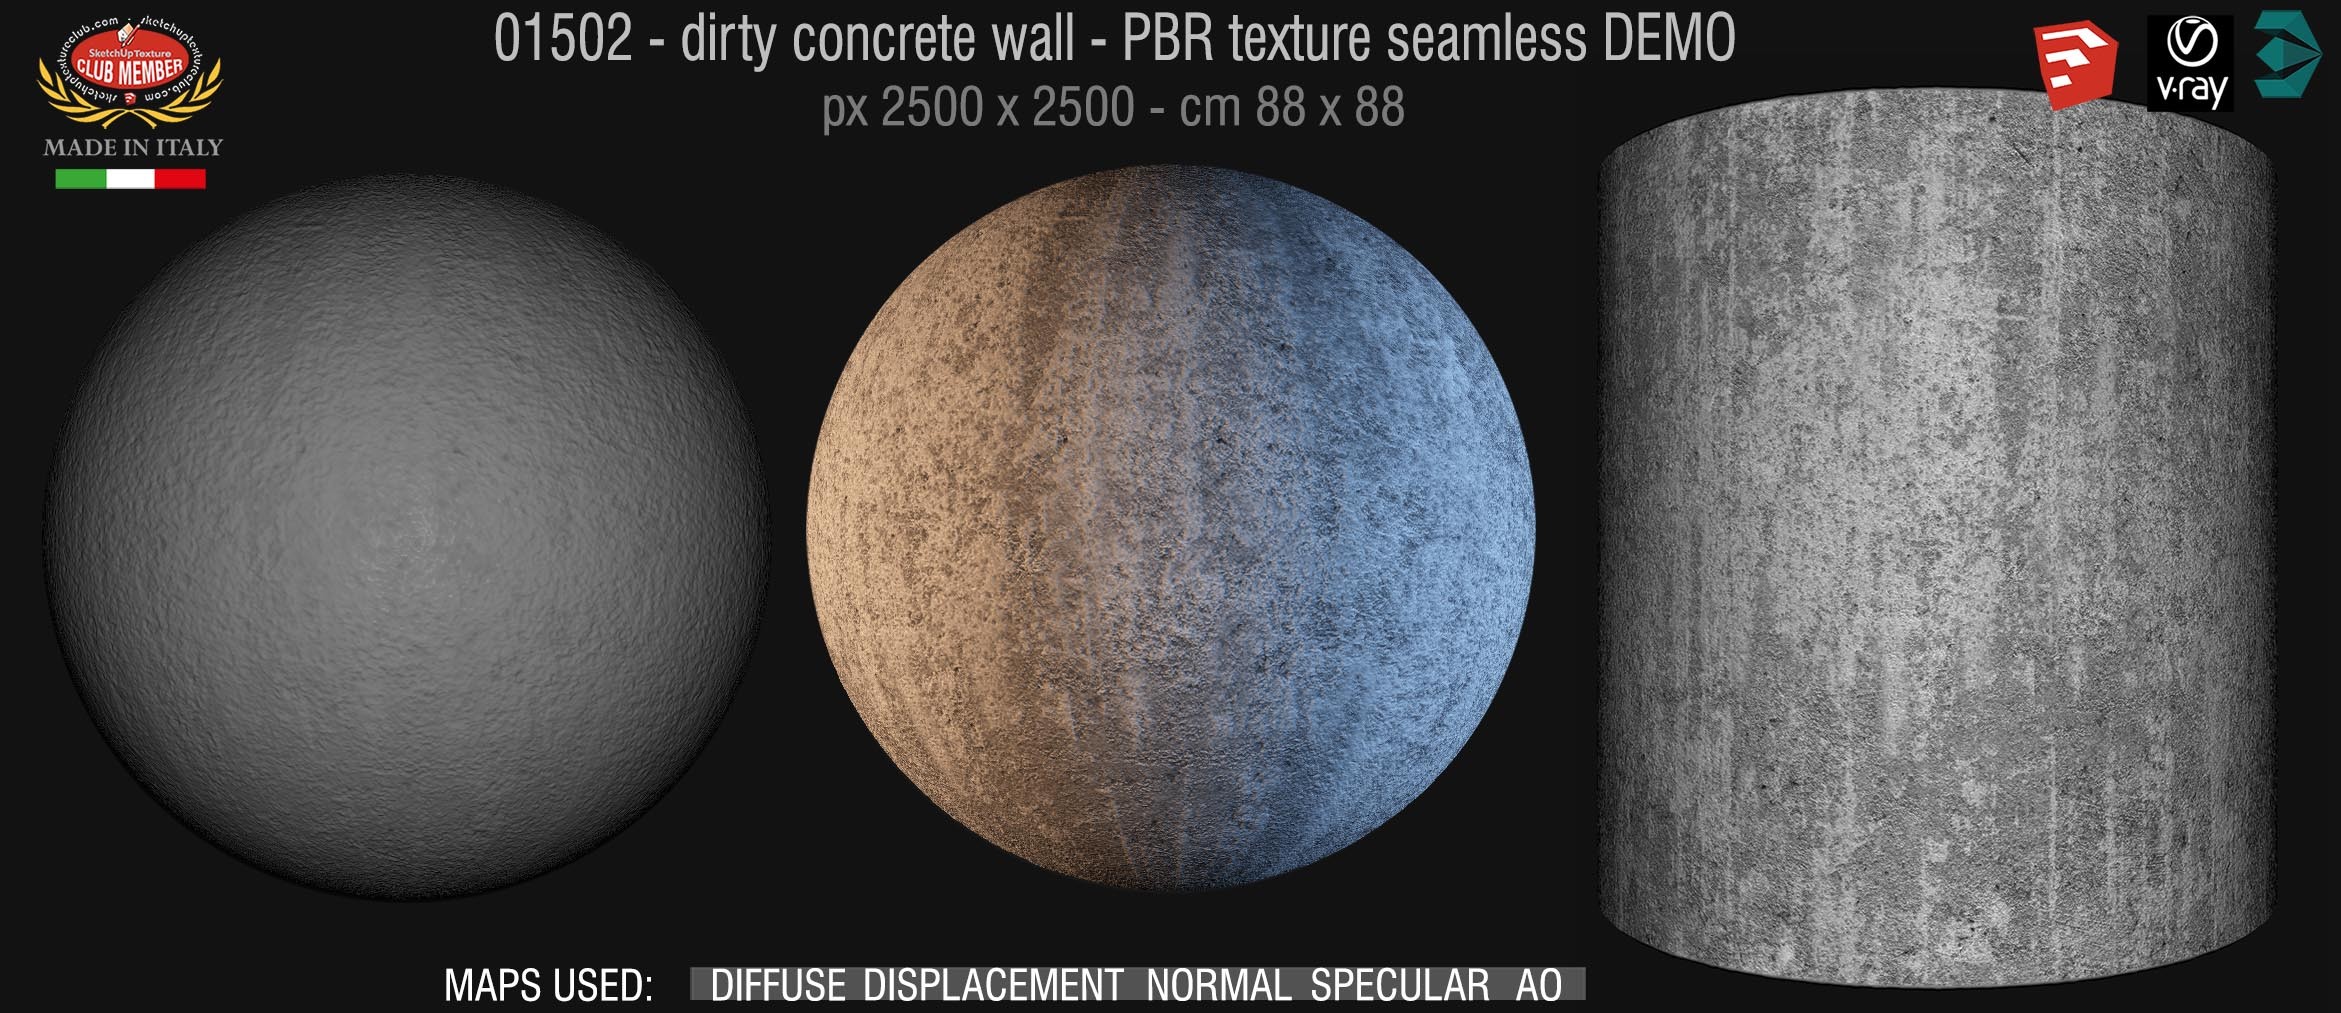 01502 Concrete bare dirty wall PBR texture seamless DEMO